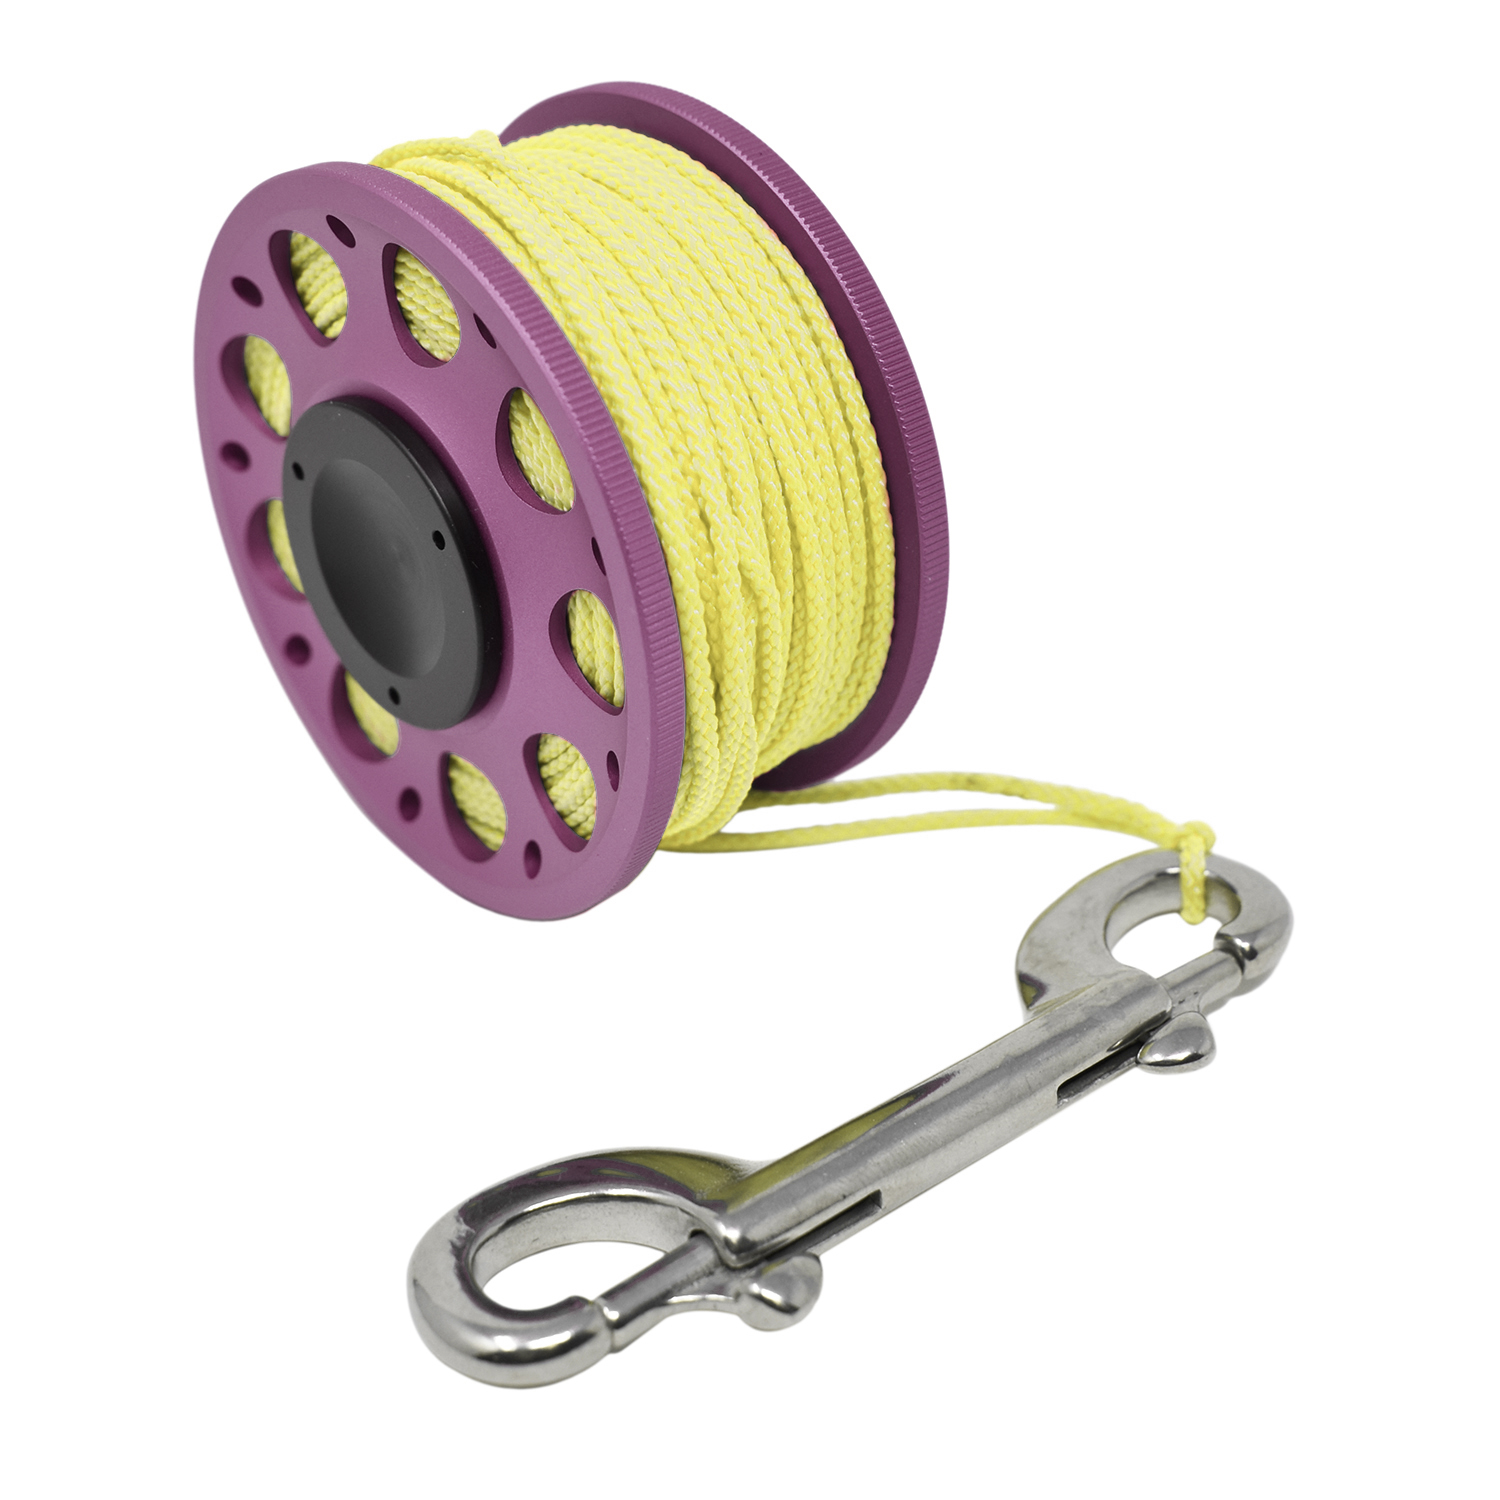 Aluminum Finger Spool 100ft Dive Reel w/ Spinning Holder, Pink/Yellow - image 1 of 4